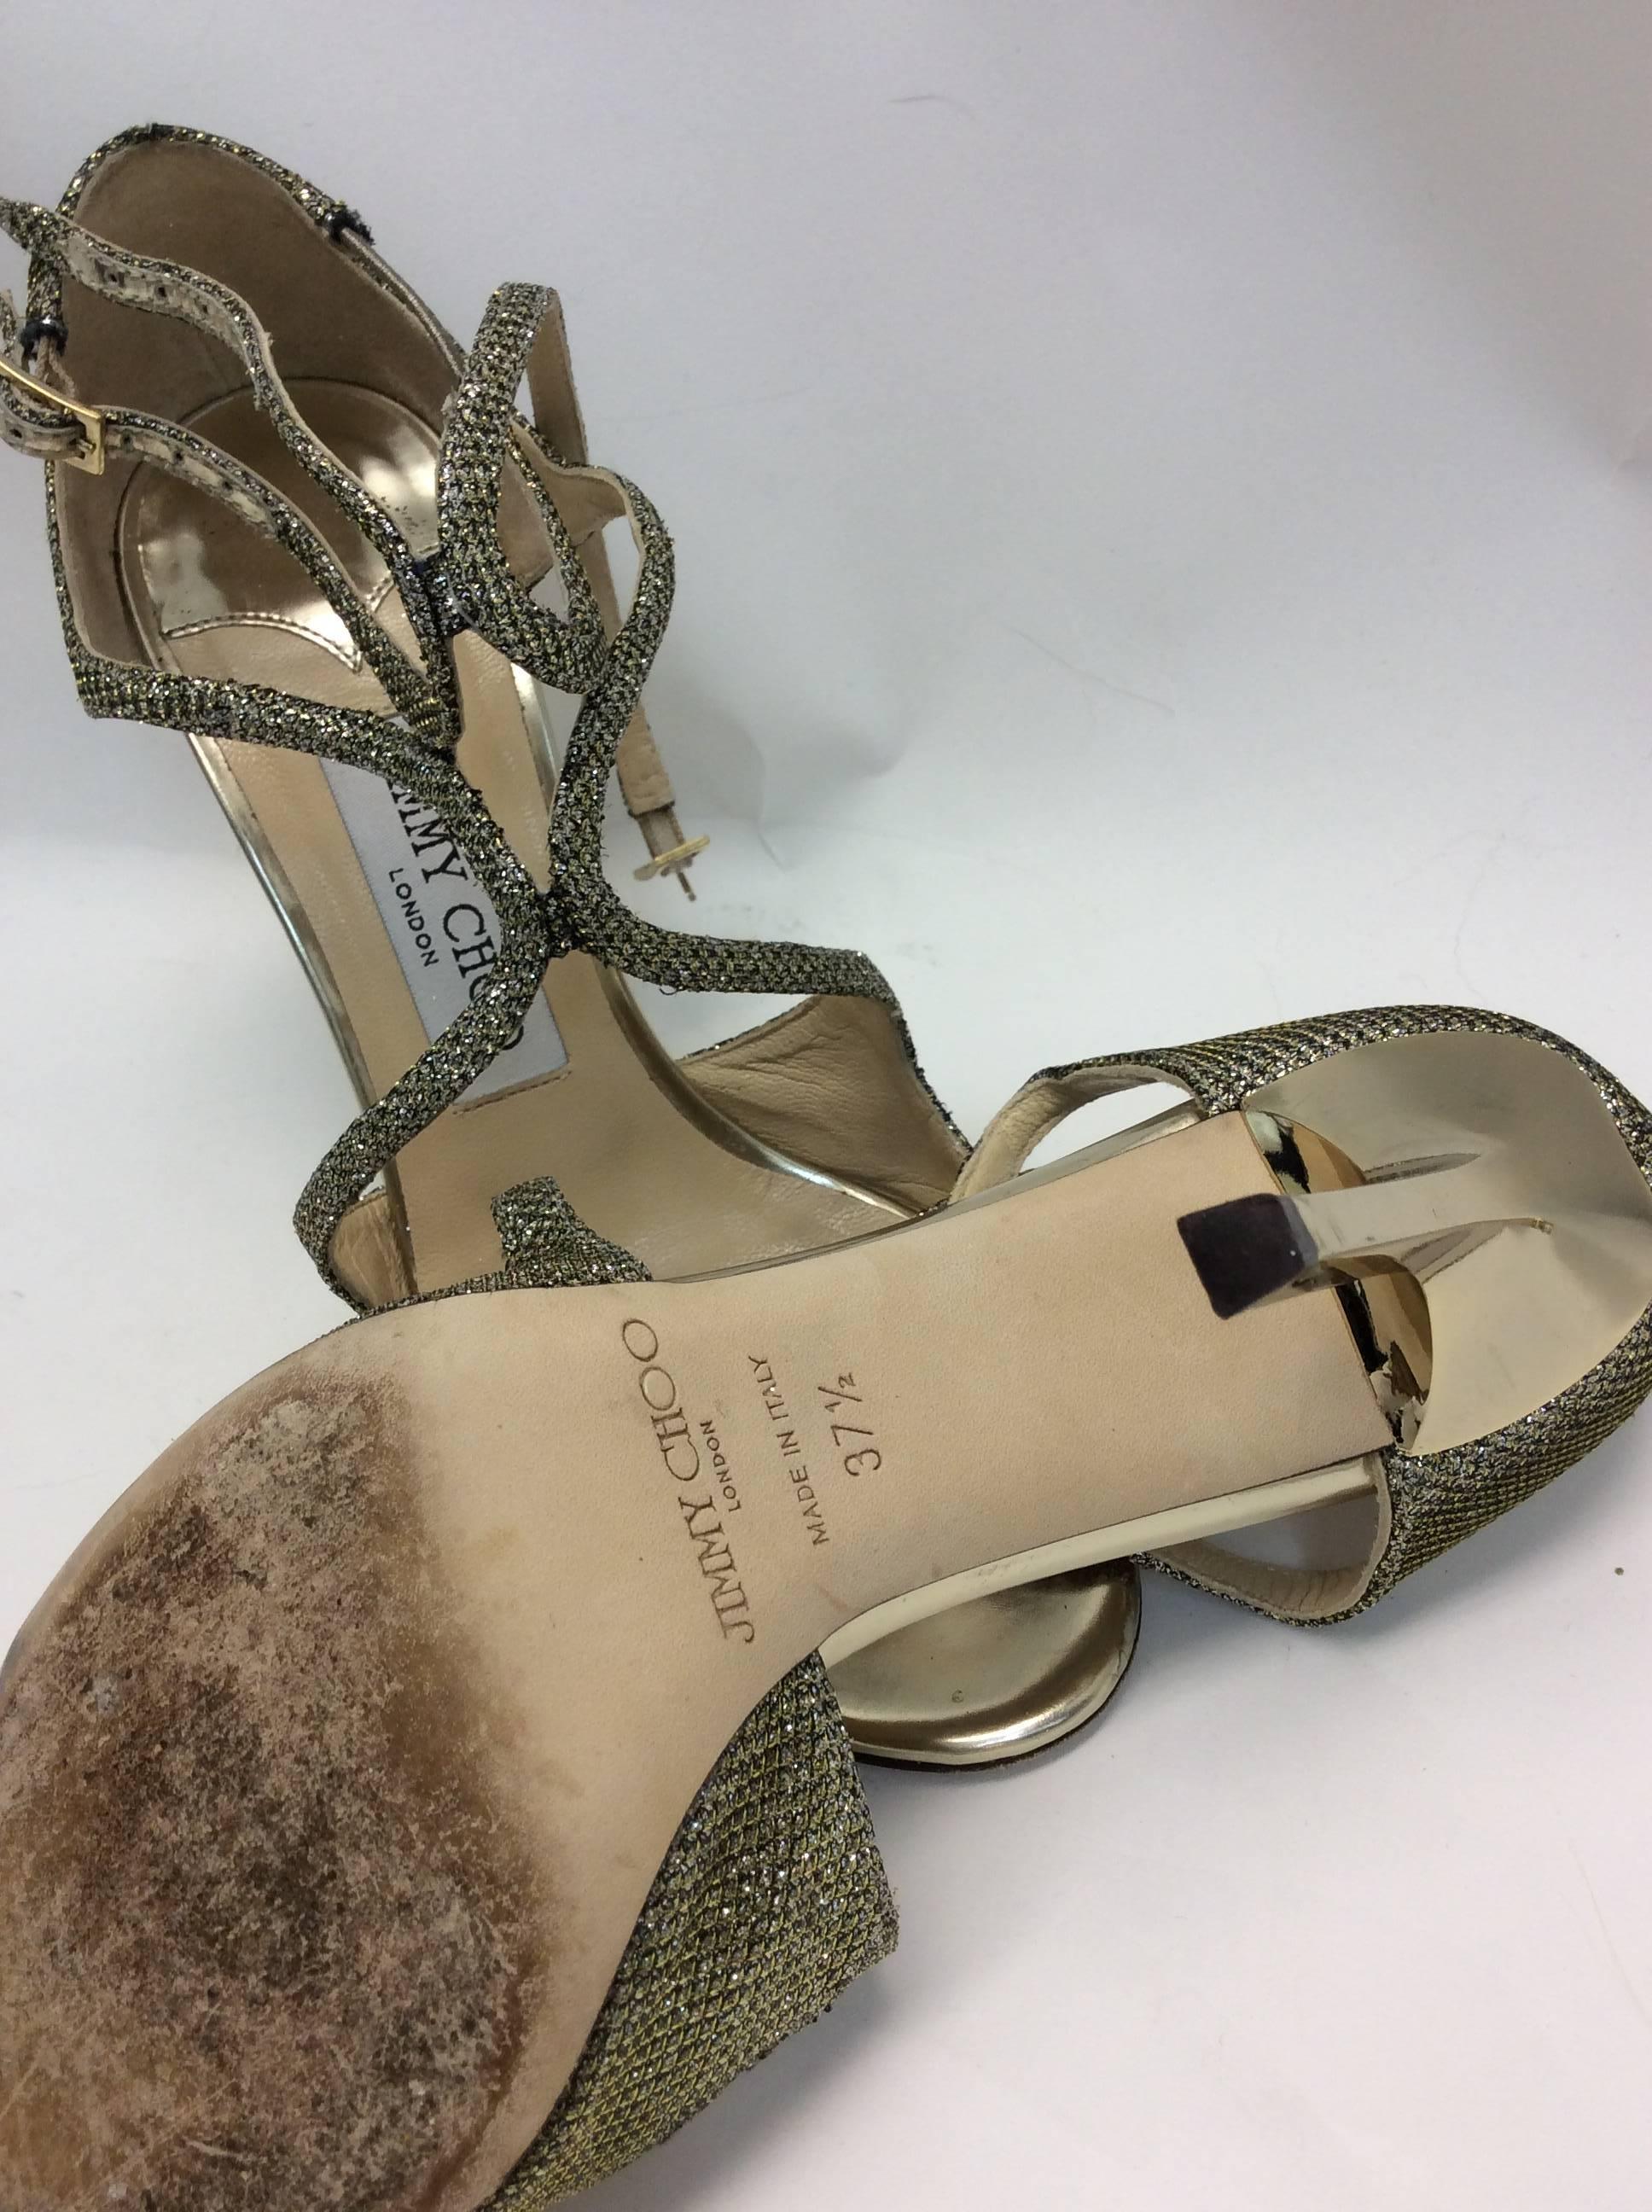 Jimmy Choo Glitter Strappy Heels In Excellent Condition For Sale In Narberth, PA